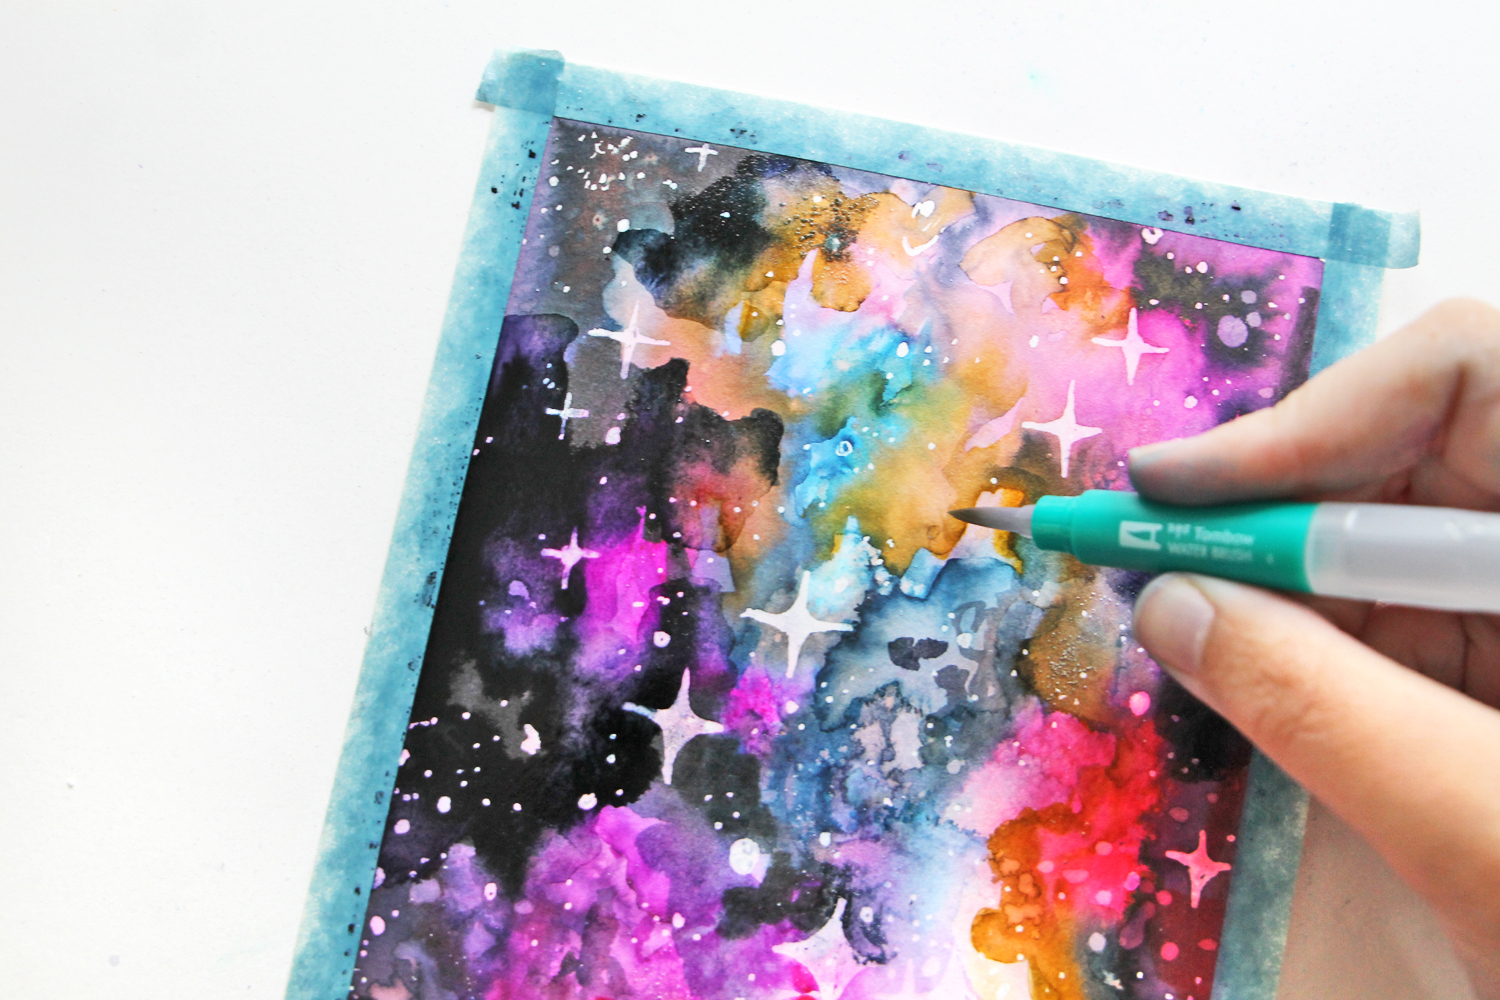 Your Guide to Painting Watercolor Galaxies Using Dual Brush Pens - Katie Smith